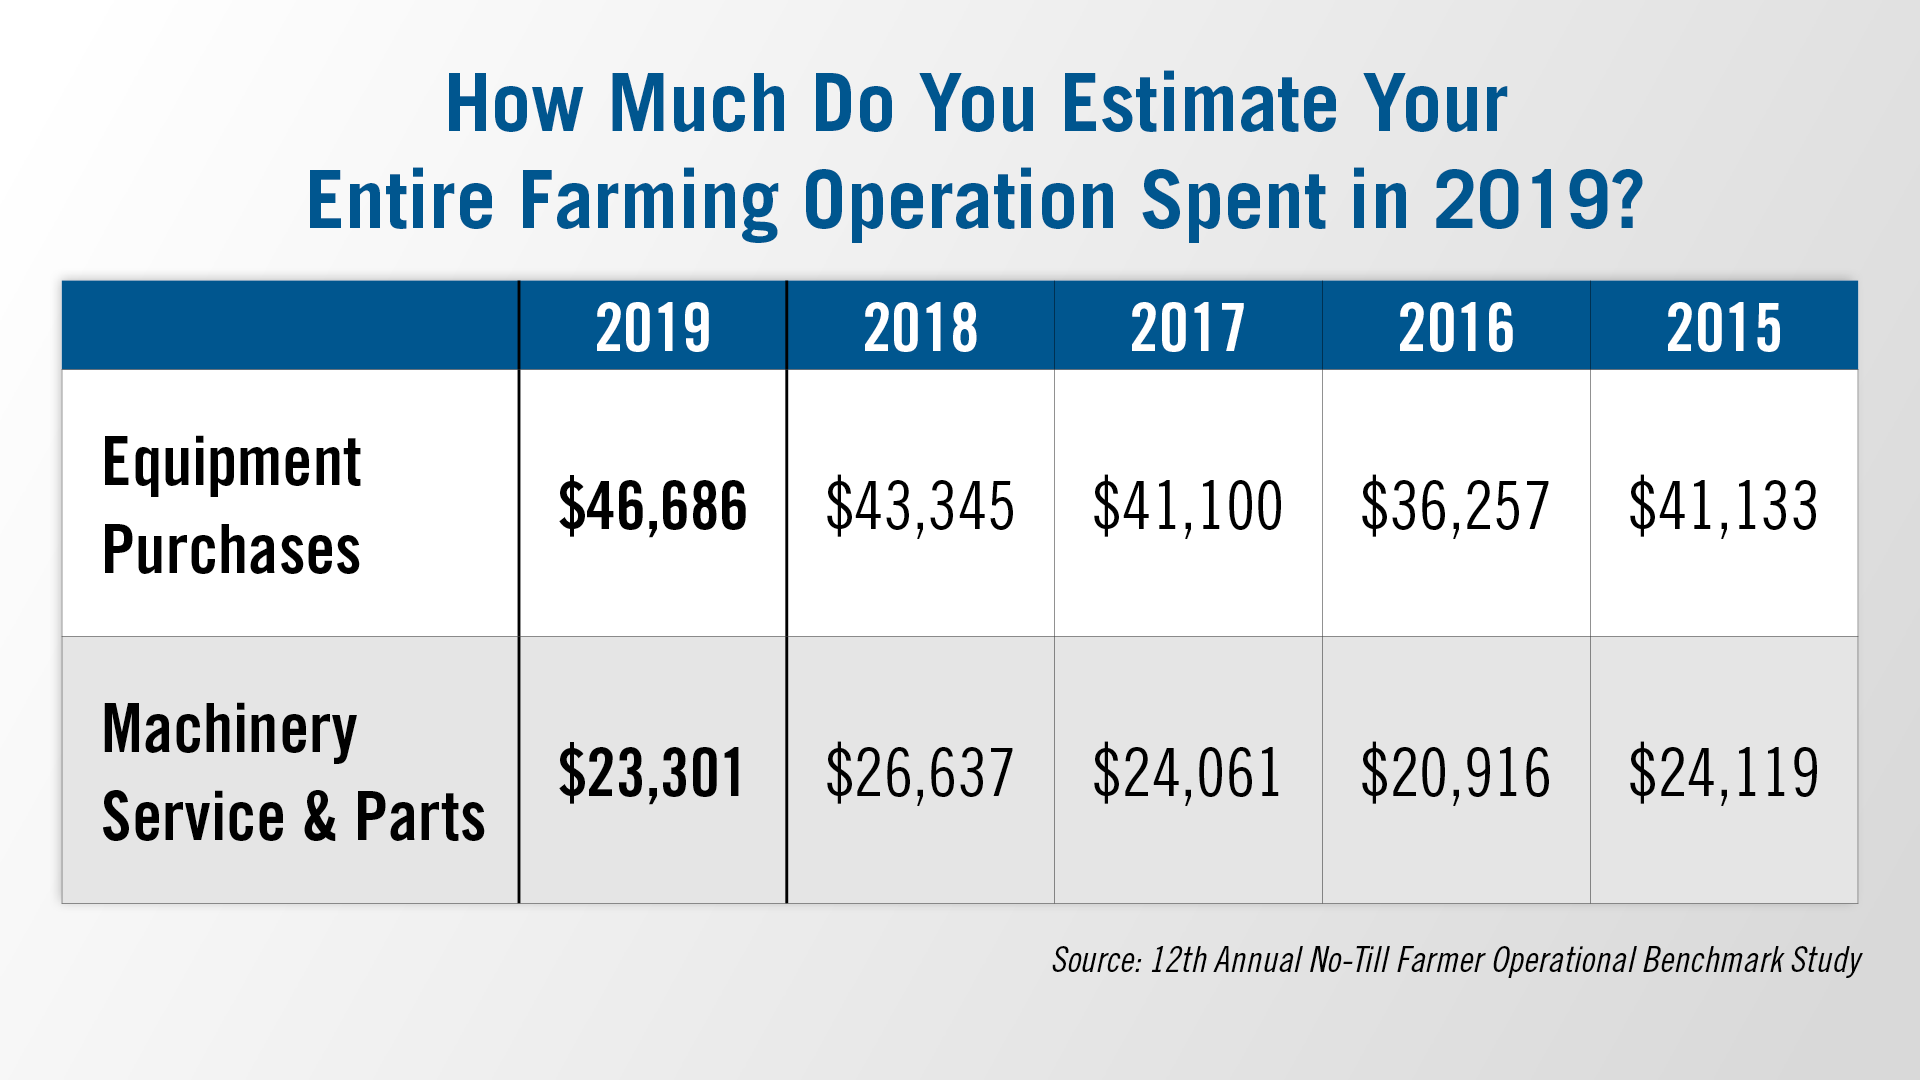 How Much do You Estimate Your Entire Farming Operation Spent in 2019?